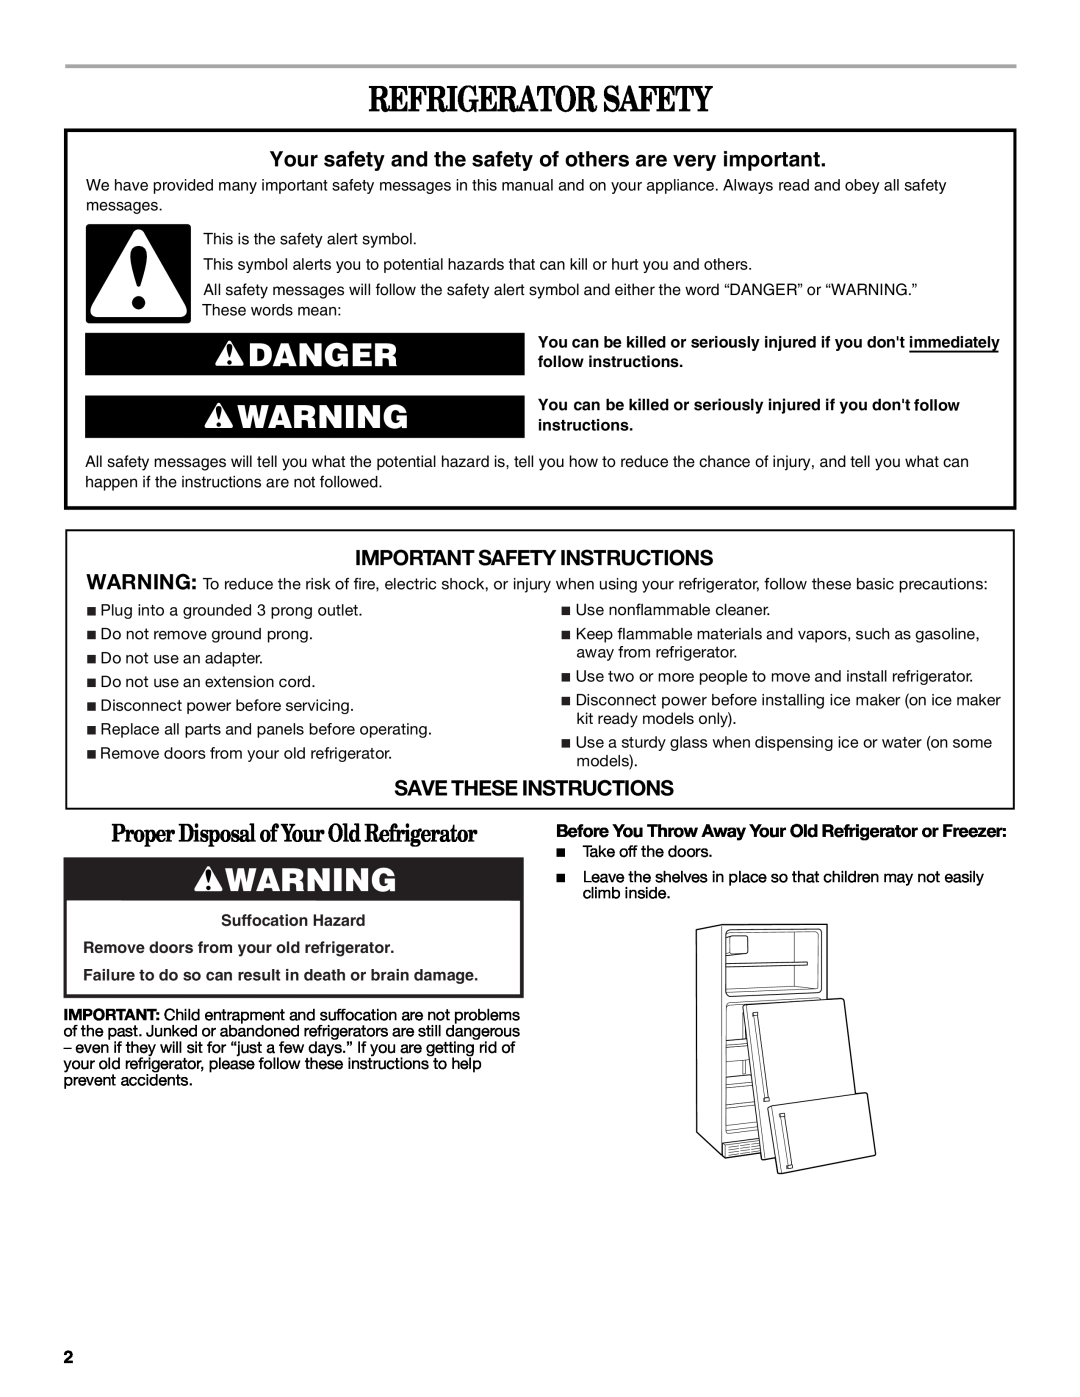 Whirlpool IT14DKXRQ00 warranty Refrigerator Safety, Danger, Important Safety Instructions, Save These Instructions 